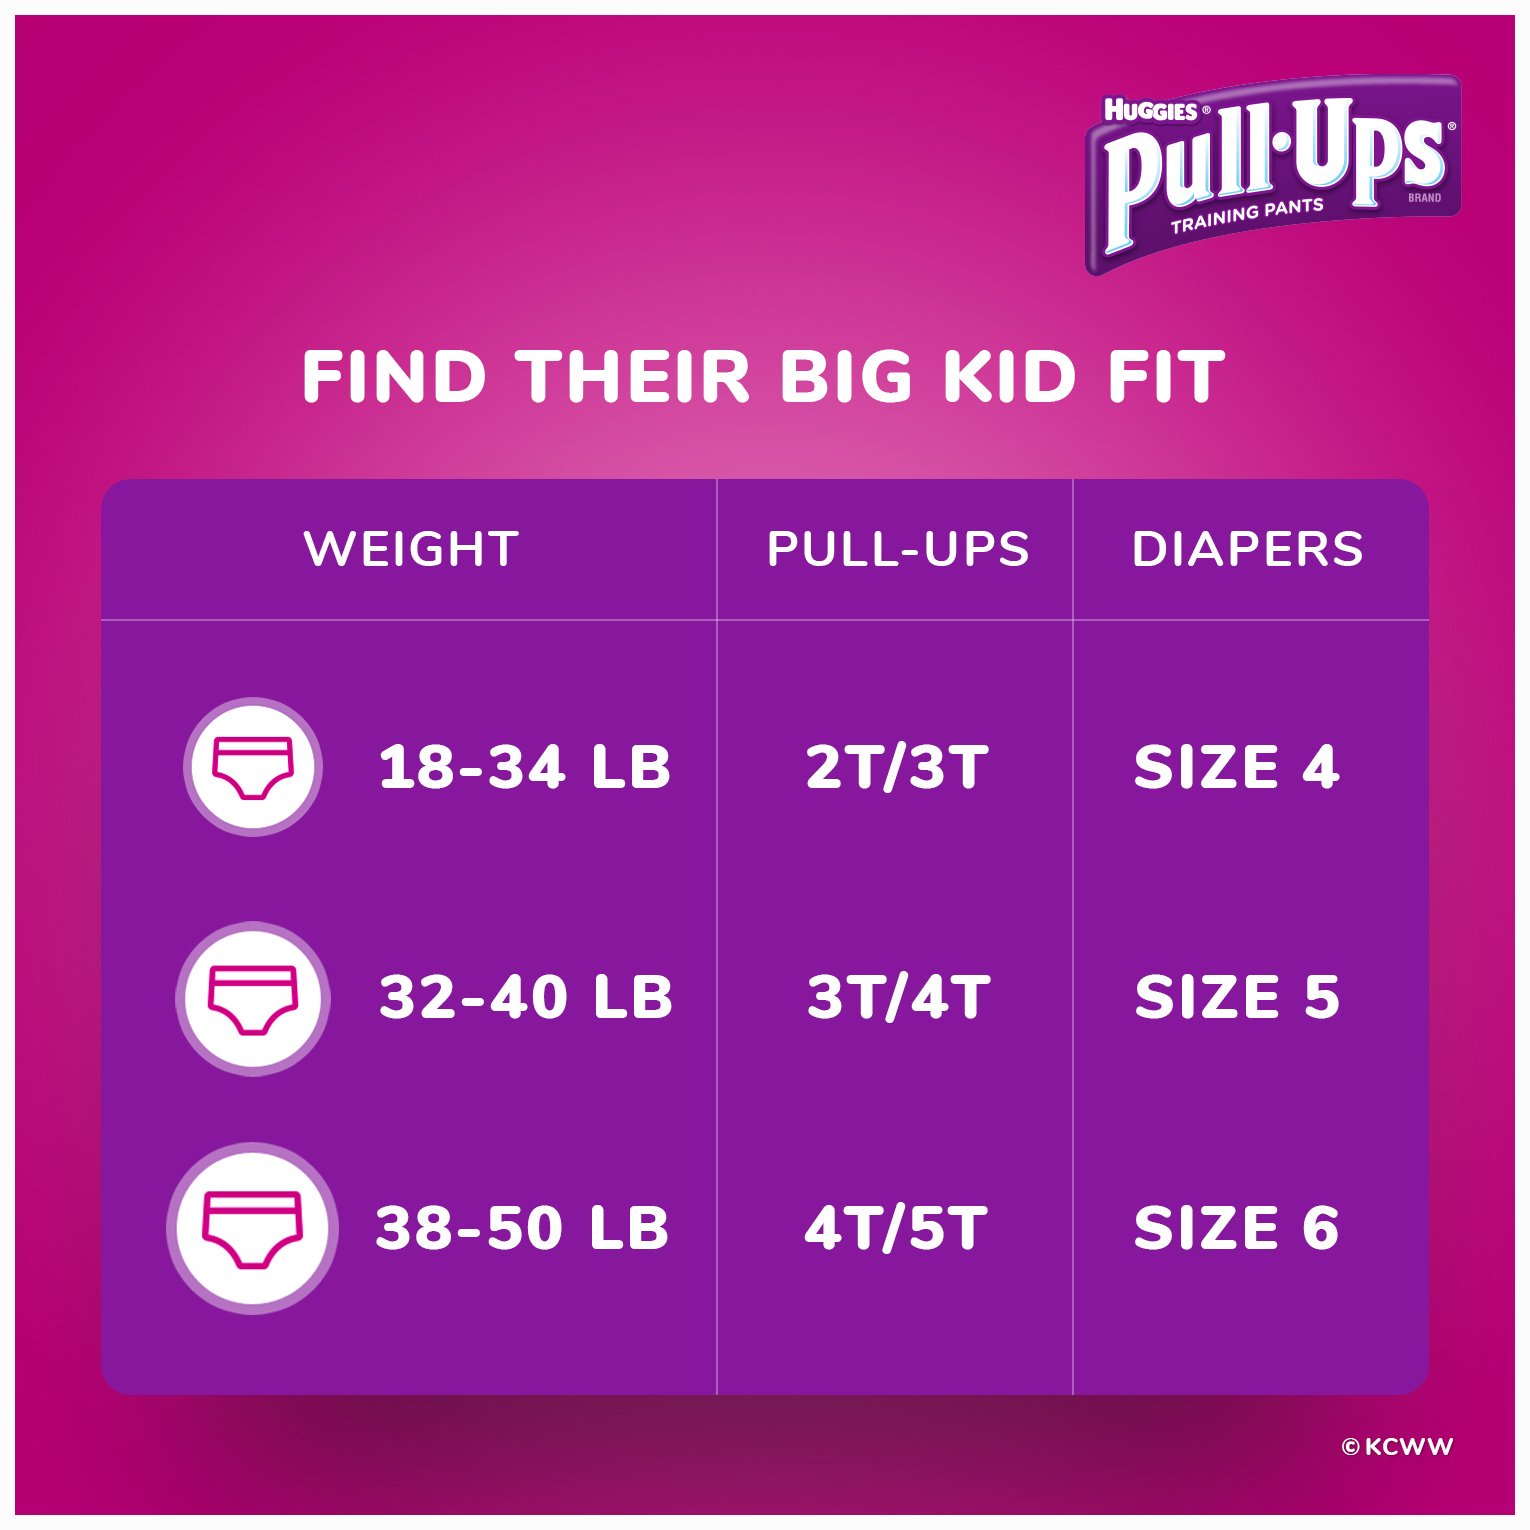 Pull-Ups Night-Time Potty Training Pants for Girls, 2T-3T (18-34 lb.), 23 Ct. (Packaging May Vary) - image 4 of 7